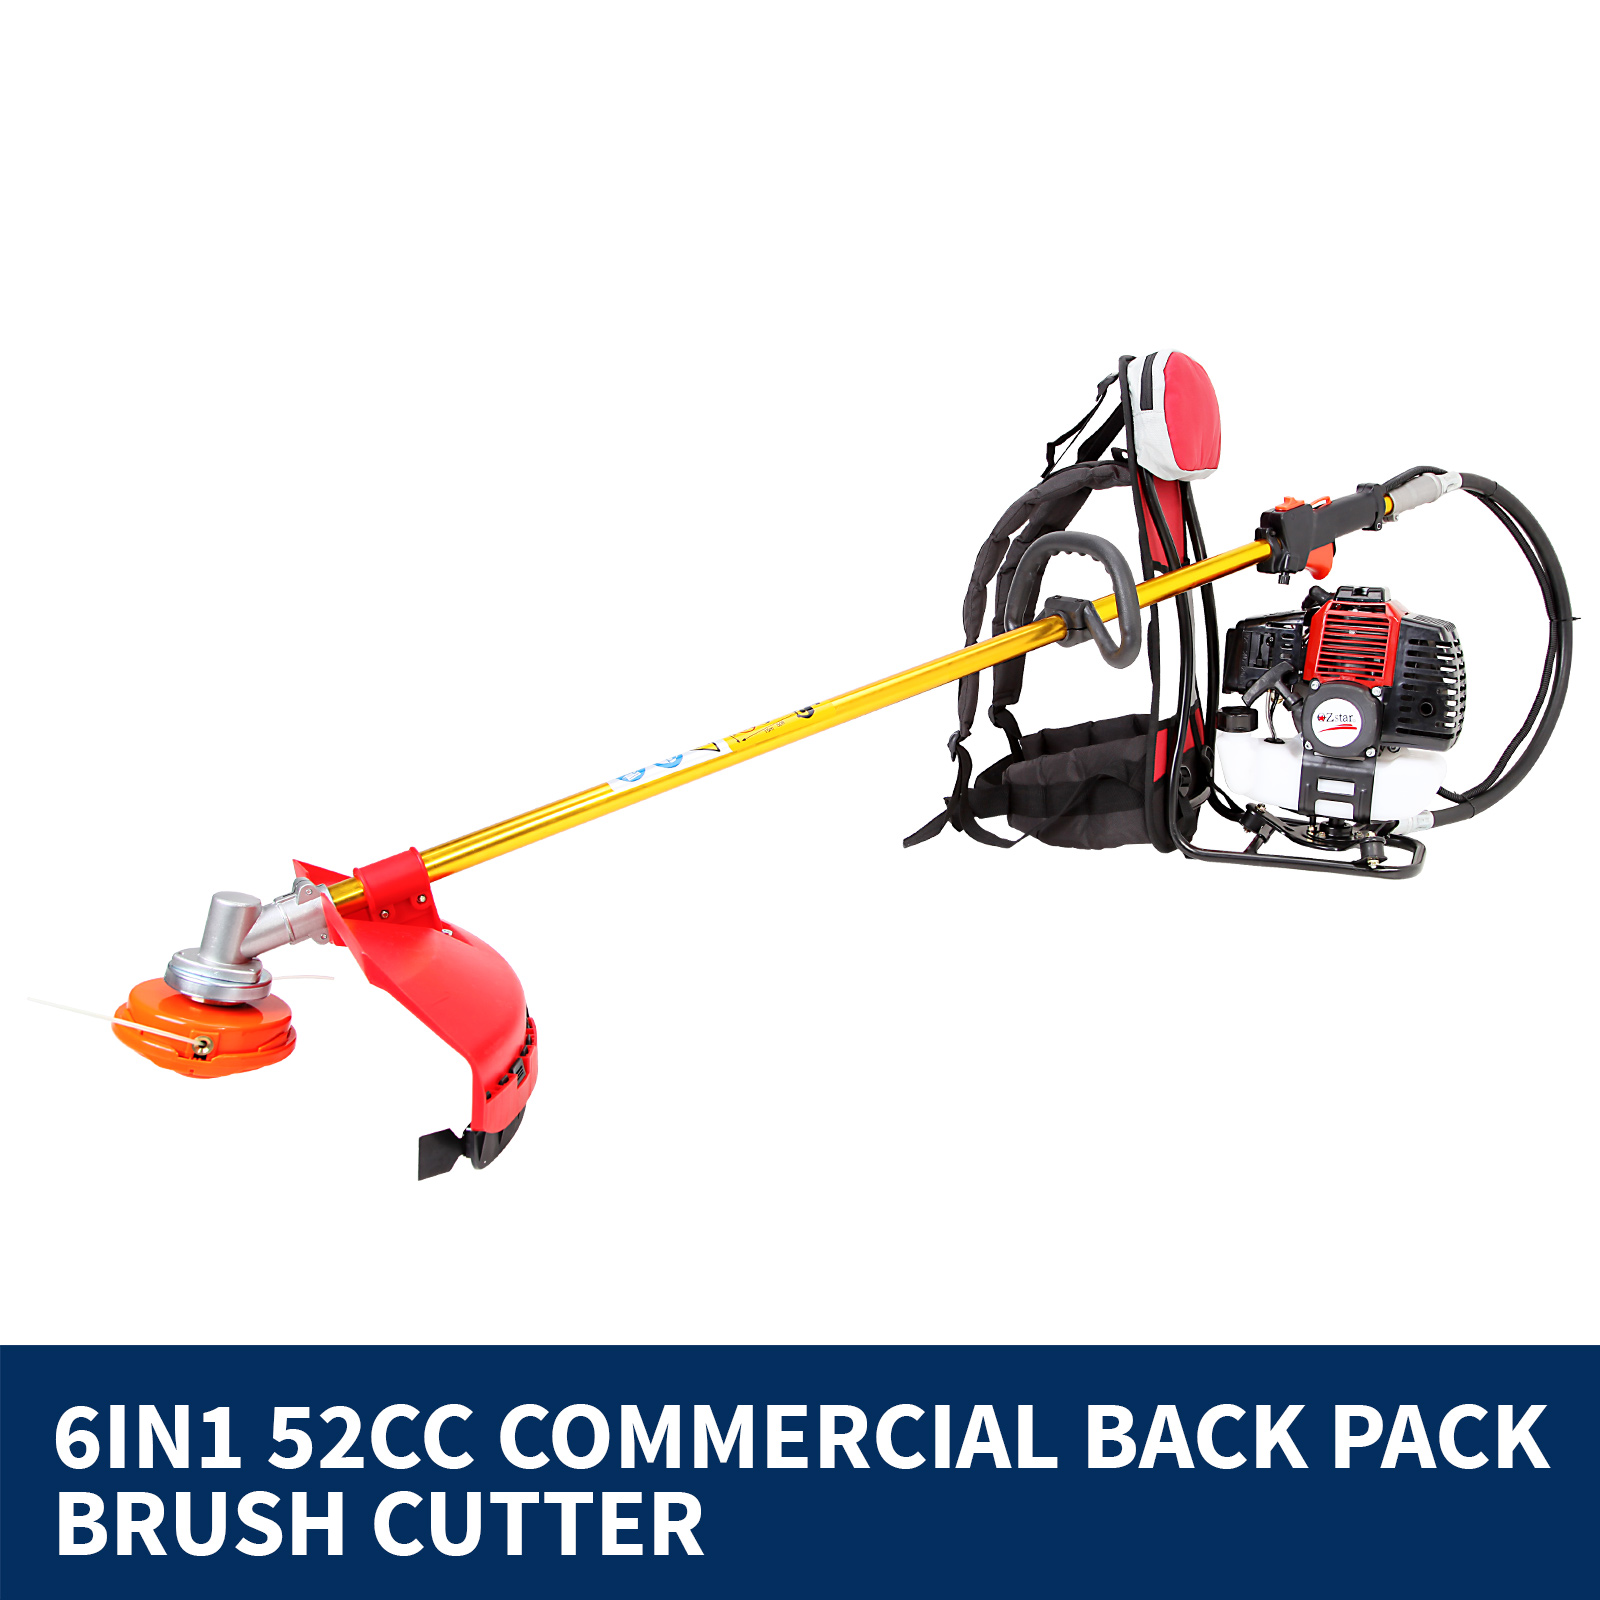 BlackEagle 52cc Petrol Brush Cutter Whipper Snipper Weed Line Trimmer Backpack 